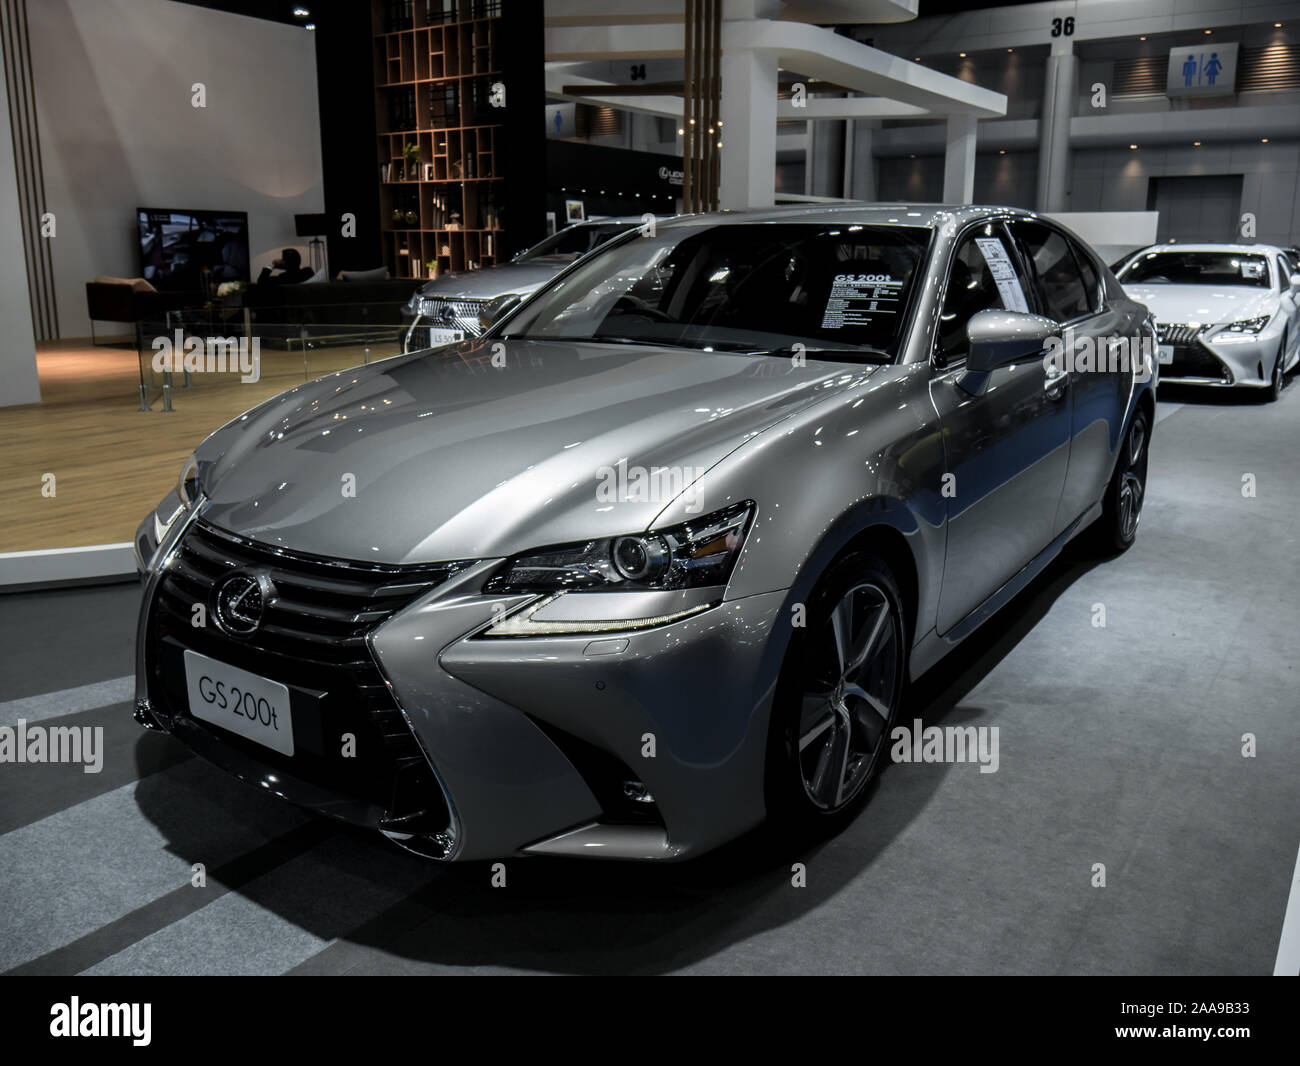 Nonthaburi Thailand March 2018 Lexus Gs 200t On Display In Bangkok International Motor Show 2018 At Impact Arena Exhibition Muangthong Thani In Th Stock Photo Alamy